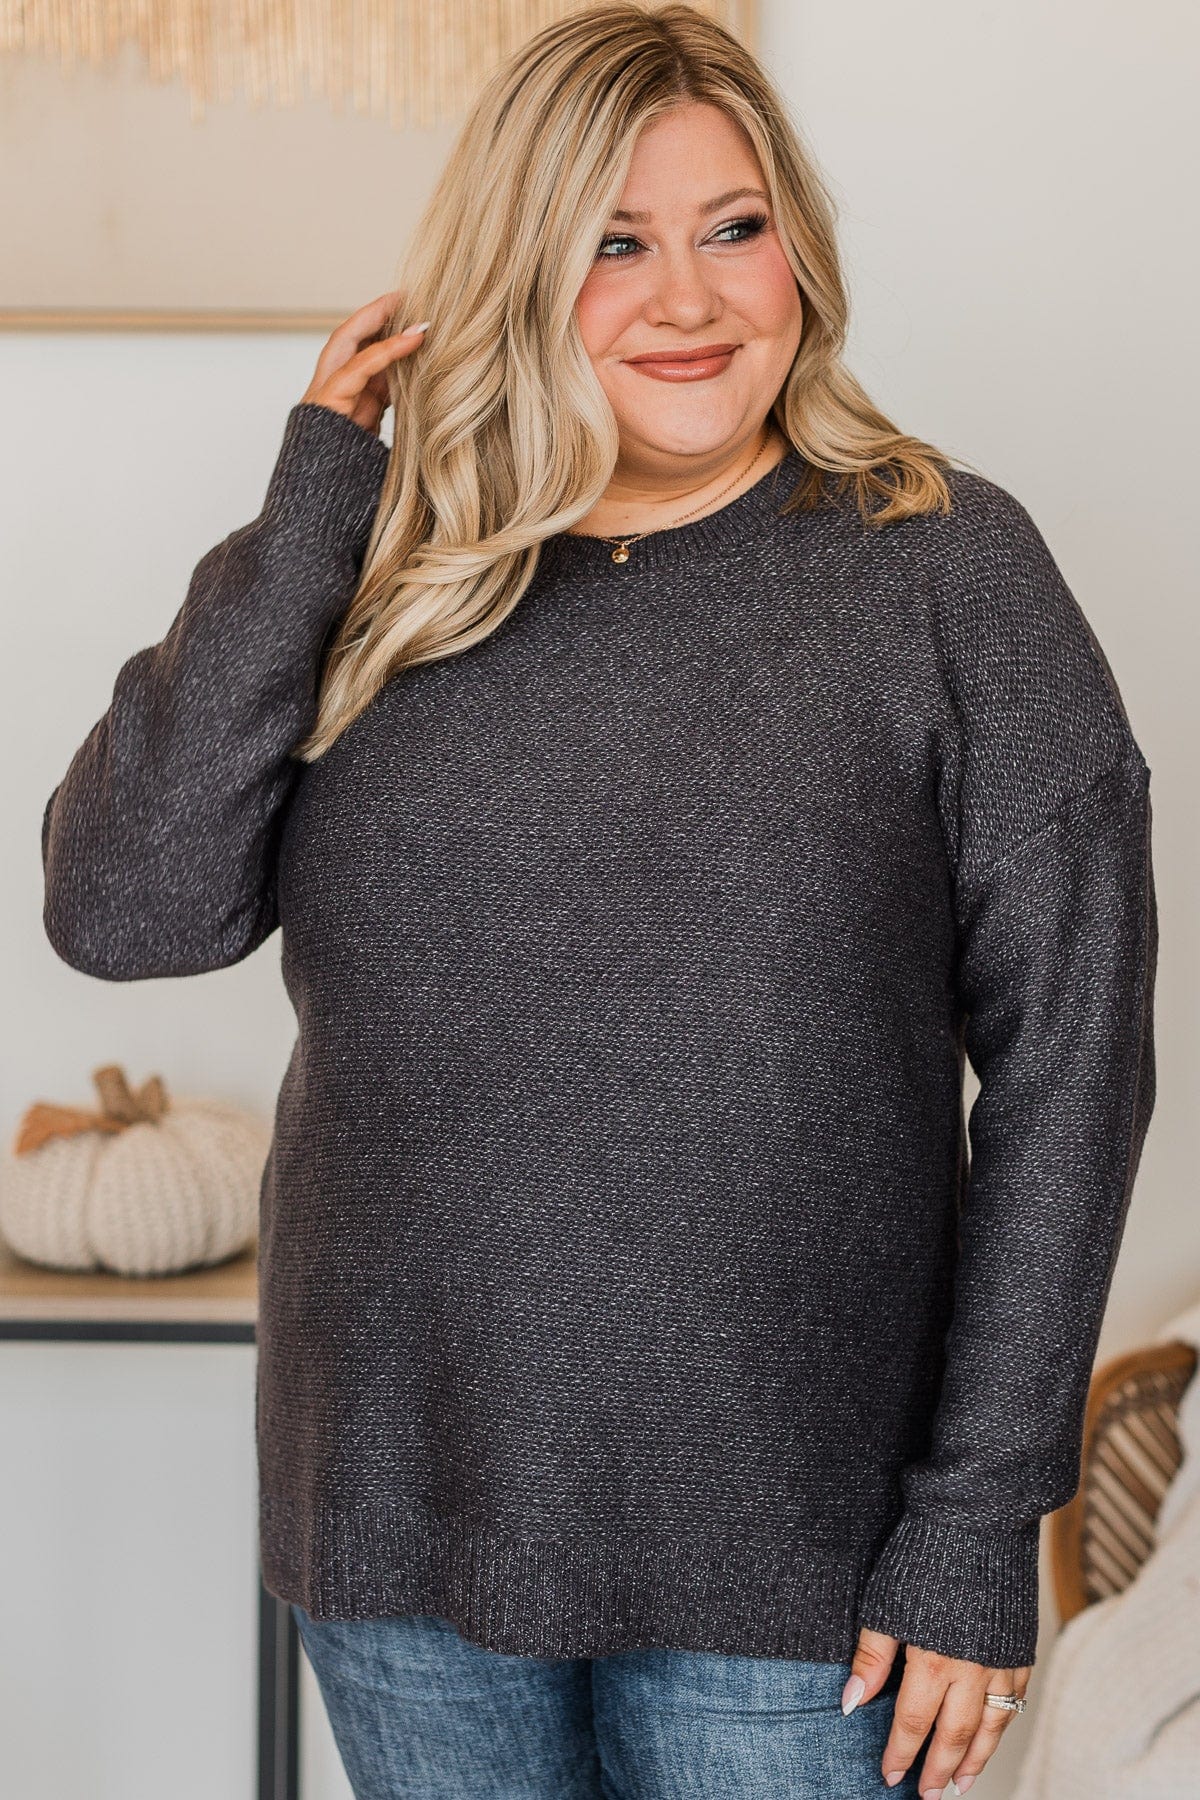 Hello Darling Knit Sweater- Charcoal